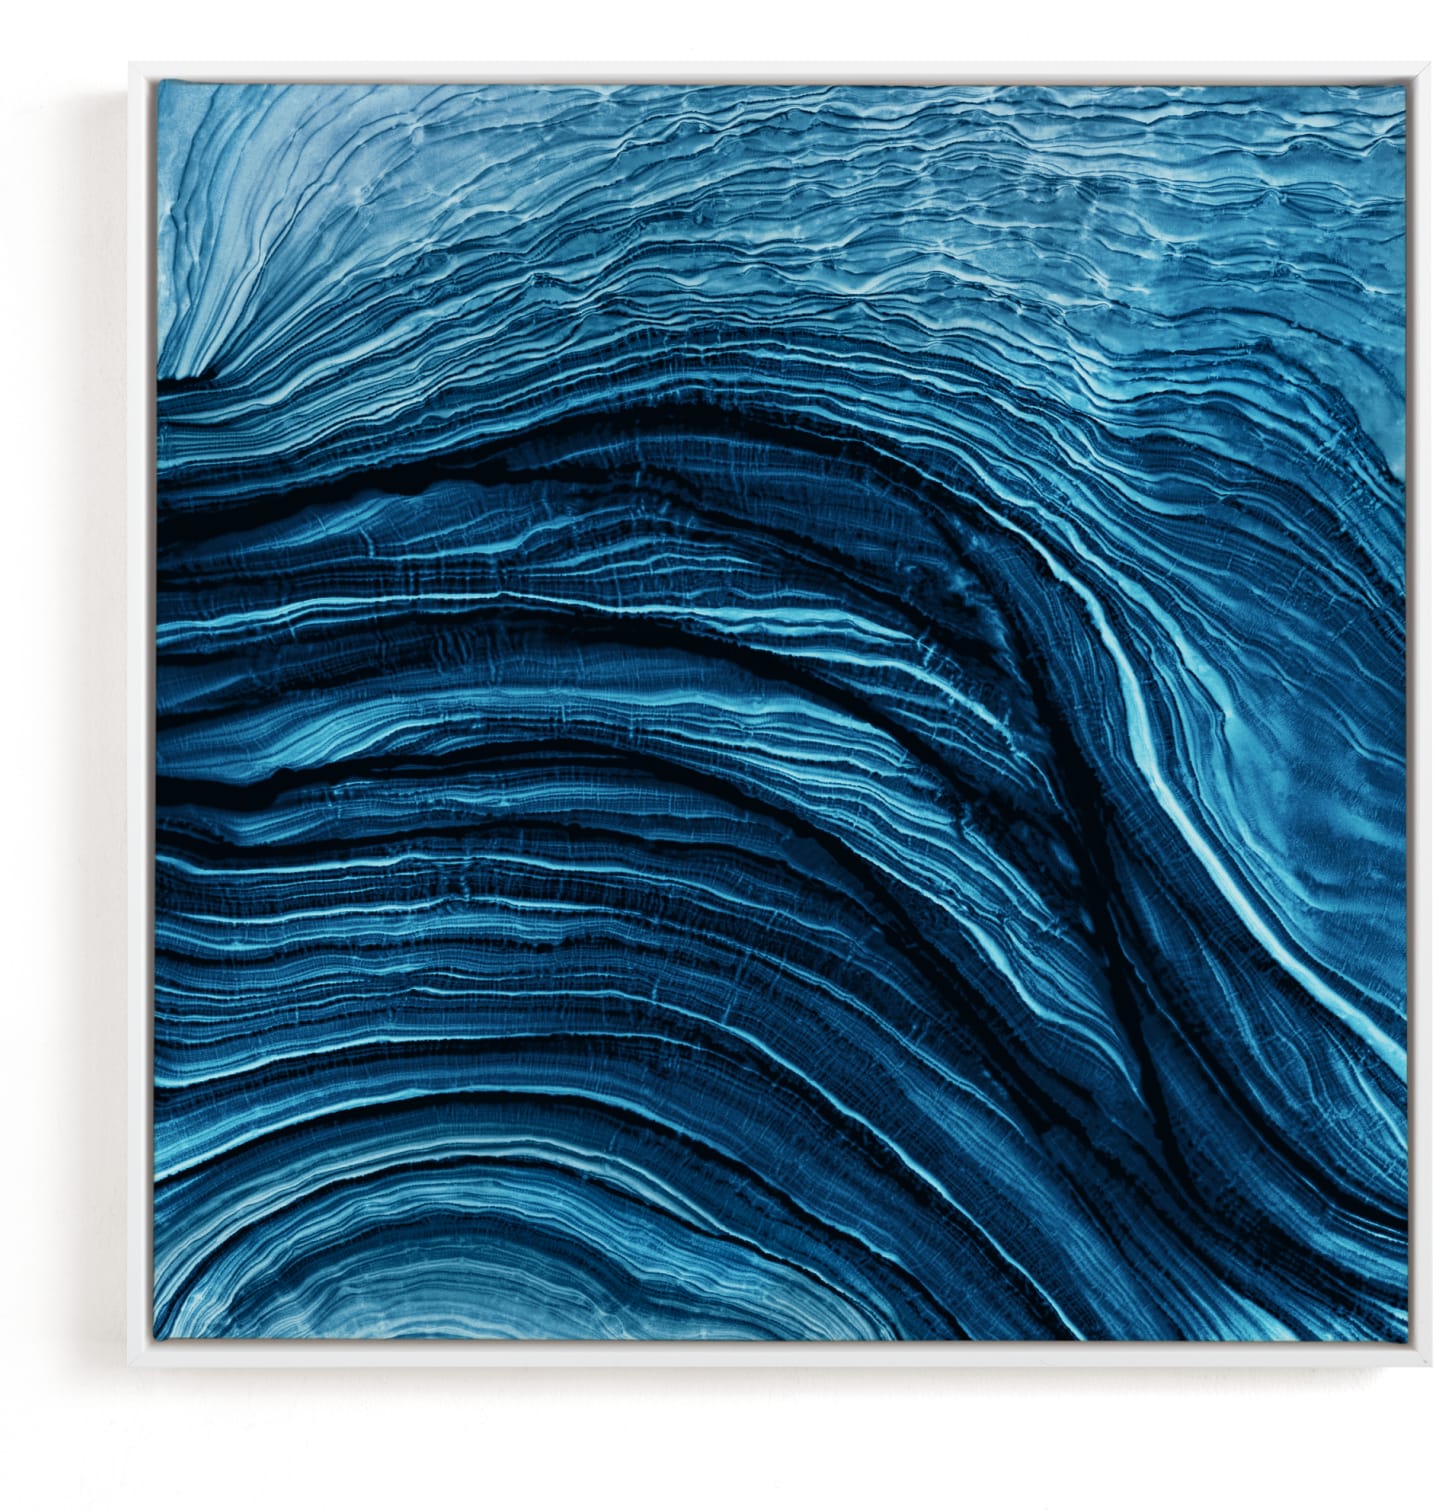 This is a blue art by Rebecca Rueth called Agate.